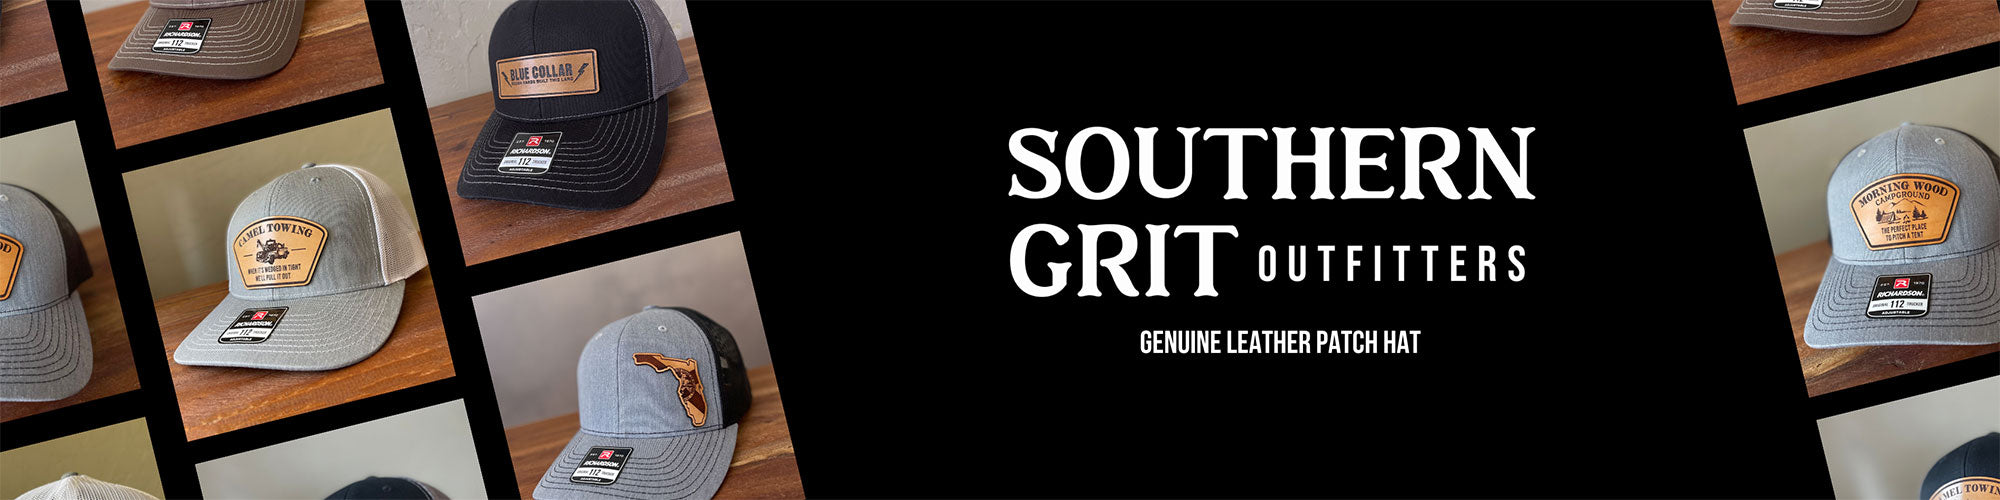 Southern Grit Outfitters FL LLC